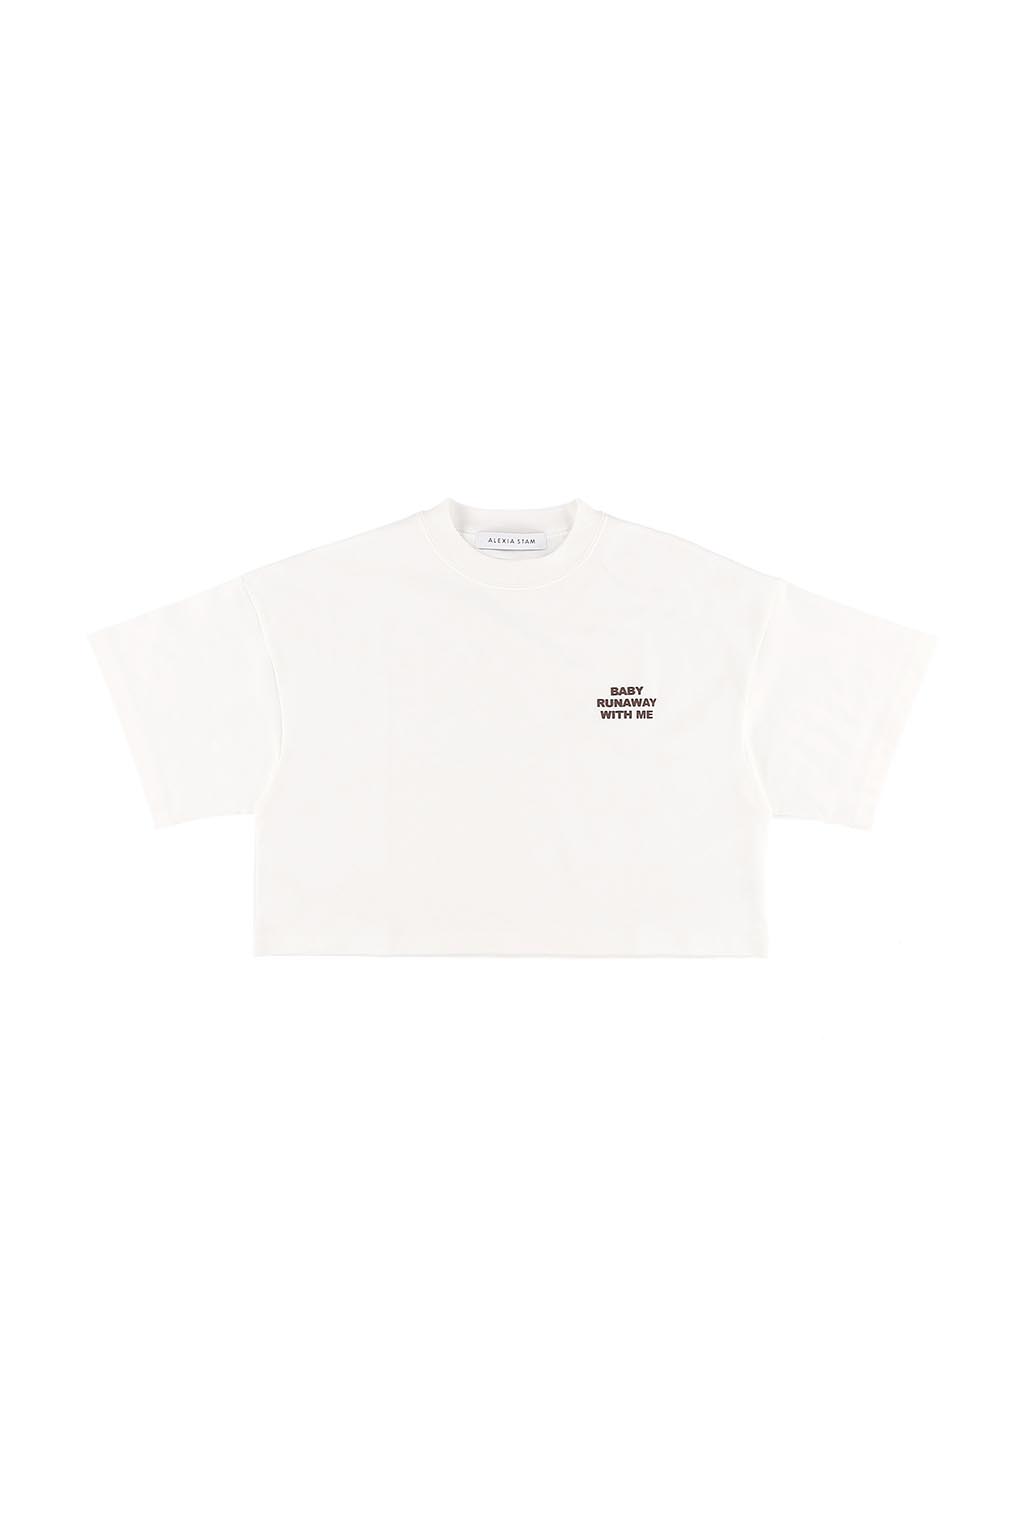 Front Message Tee White 2